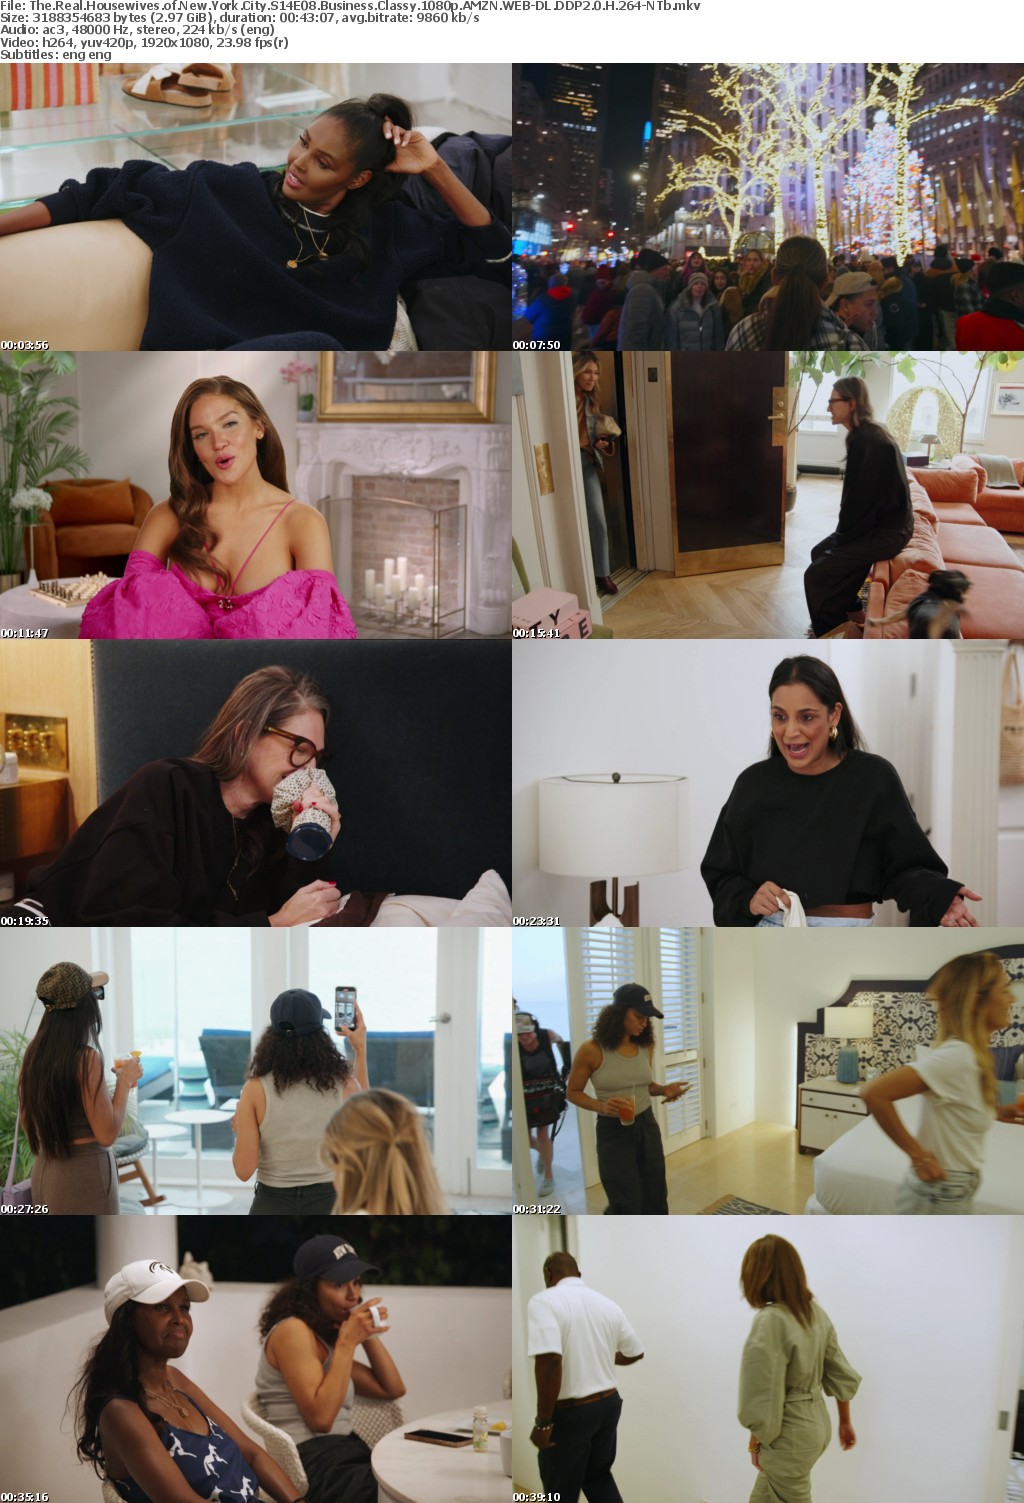 The Real Housewives of New York City S14E08 Business Classy 1080p AMZN WEB-DL DDP2 0 H 264-NTb